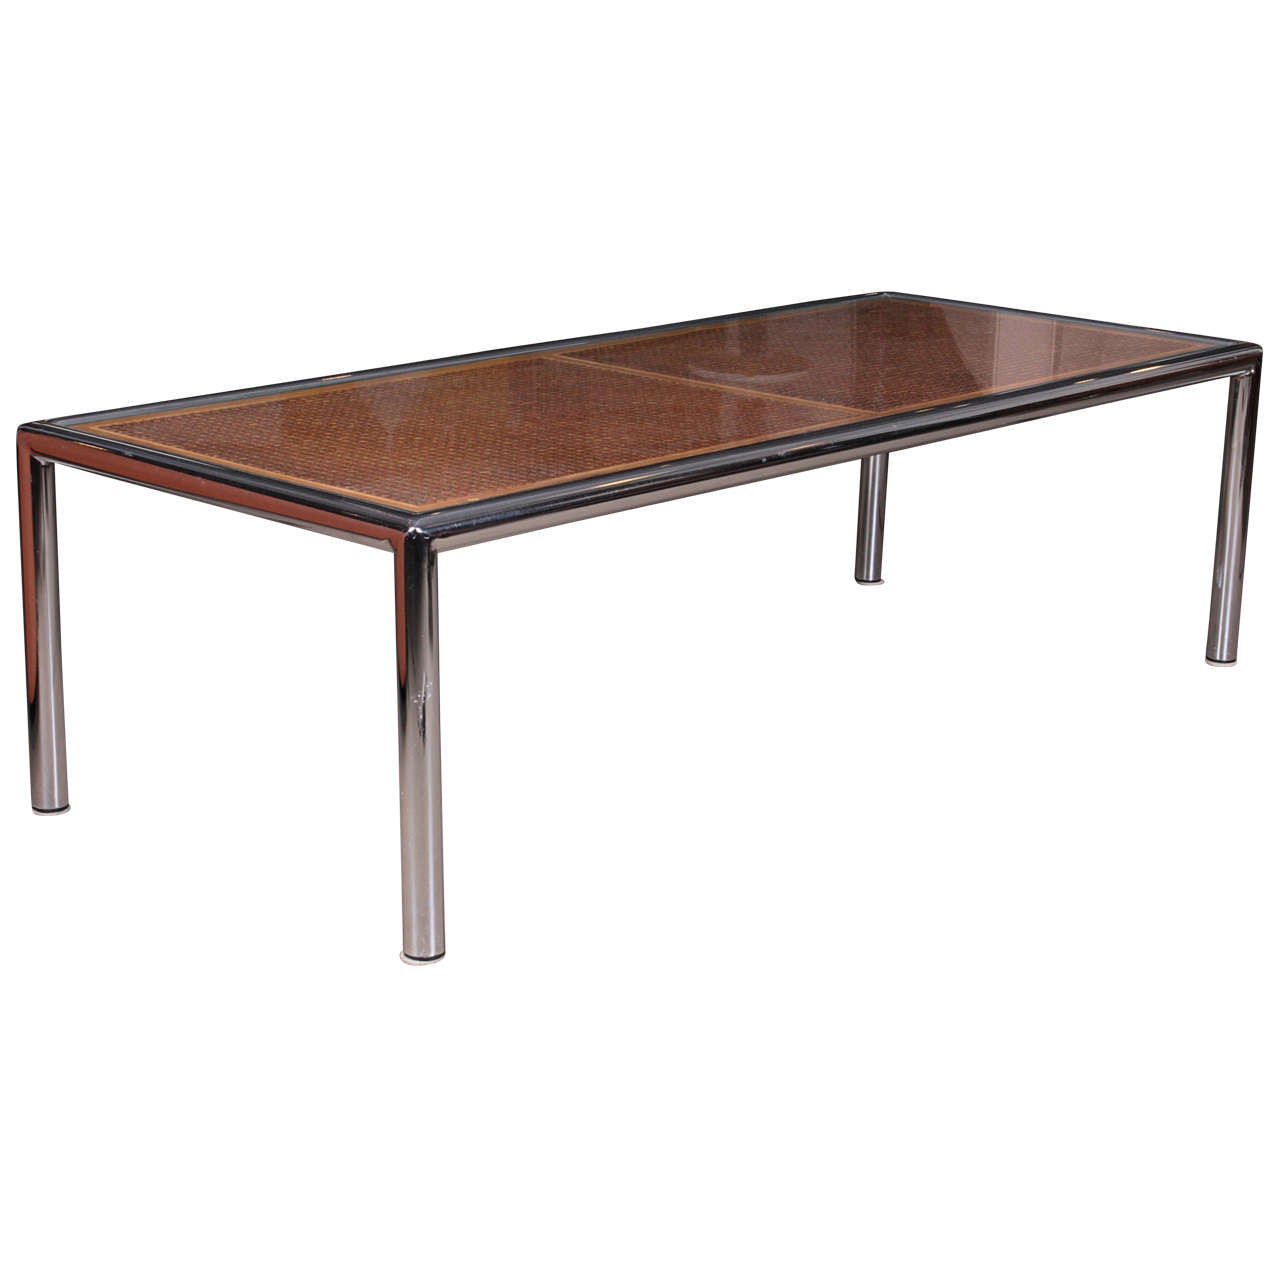 1970s Chrome and Caned Coffee Table by Milo Baughman